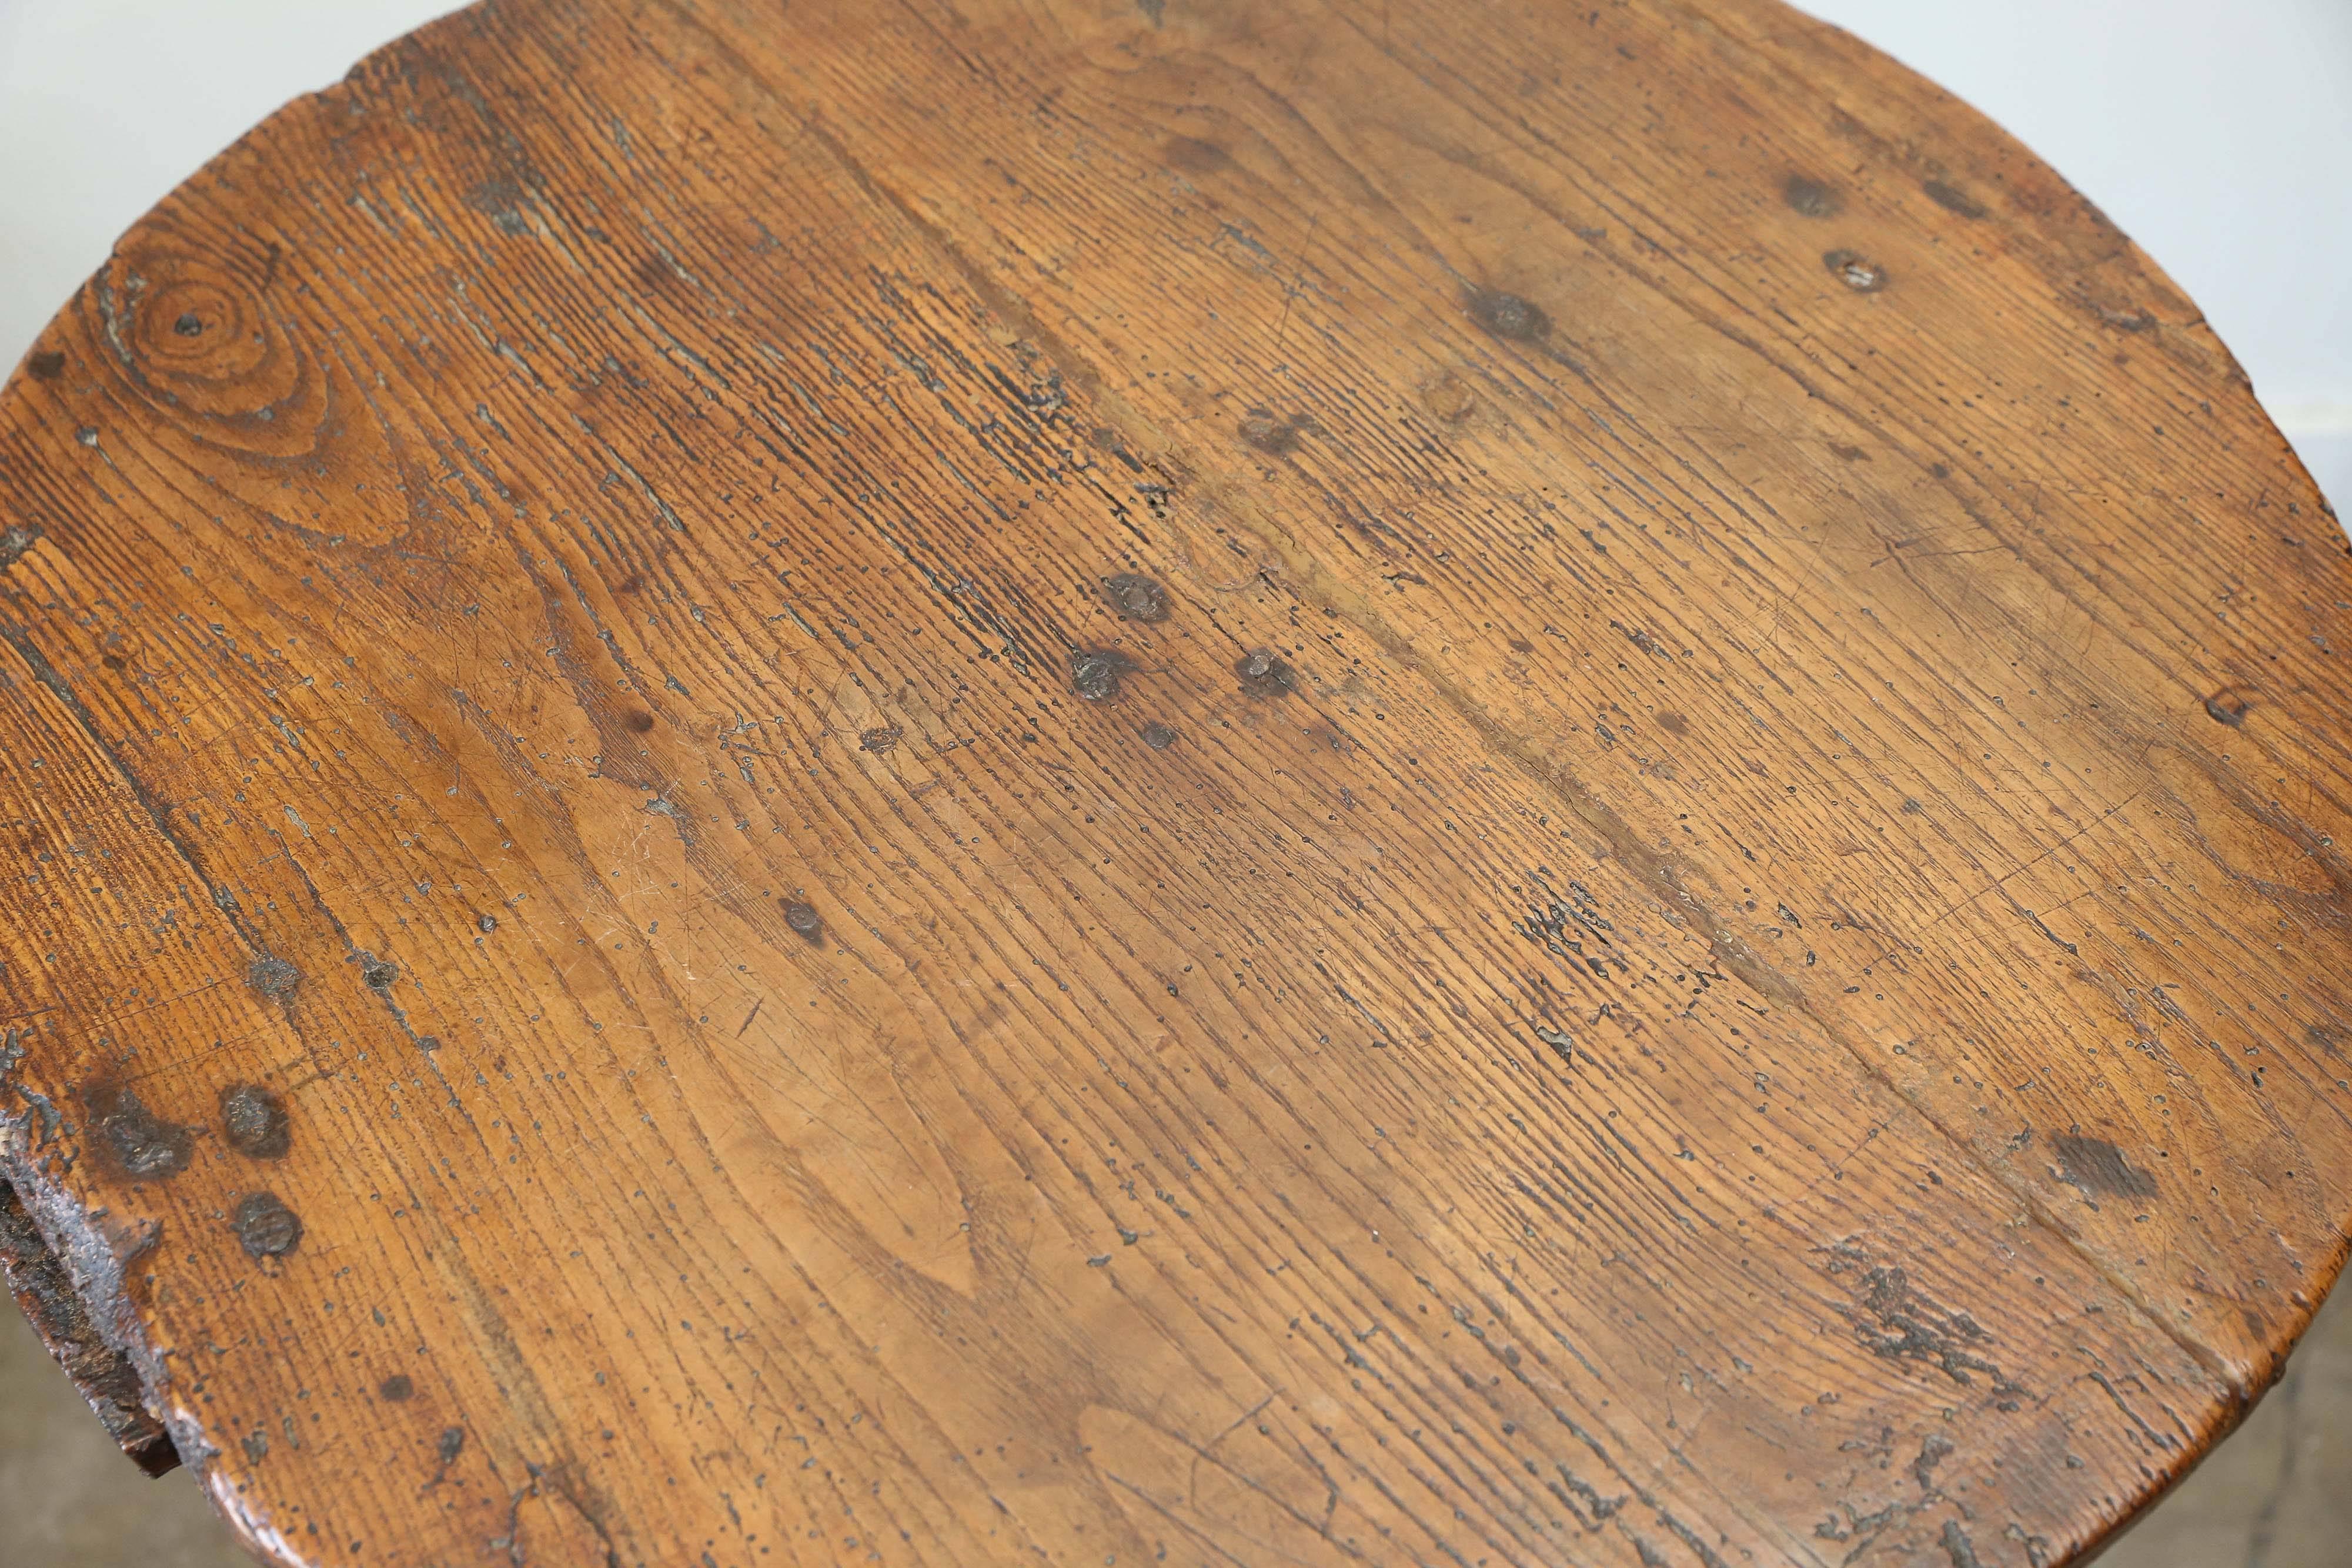 18th century elm cricket table with T-stretcher at base, England, circa 1770. Beautiful patina. Purchased from the estate of a country Folk Art antiques dealer.